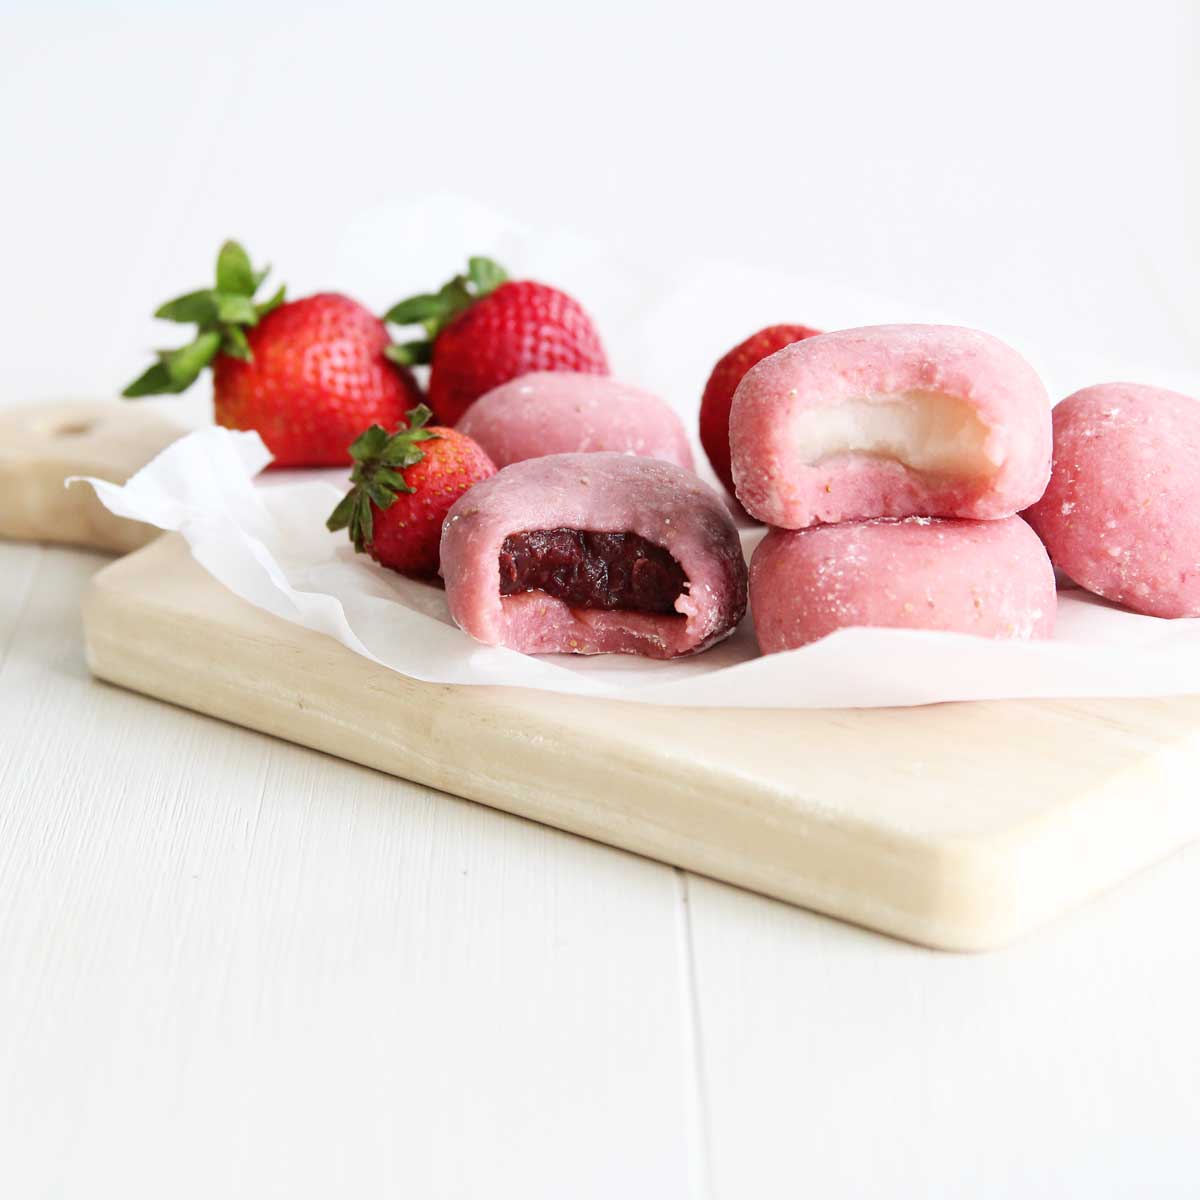 strawberry mochi with two different fillings - red bean paste and white bean paste